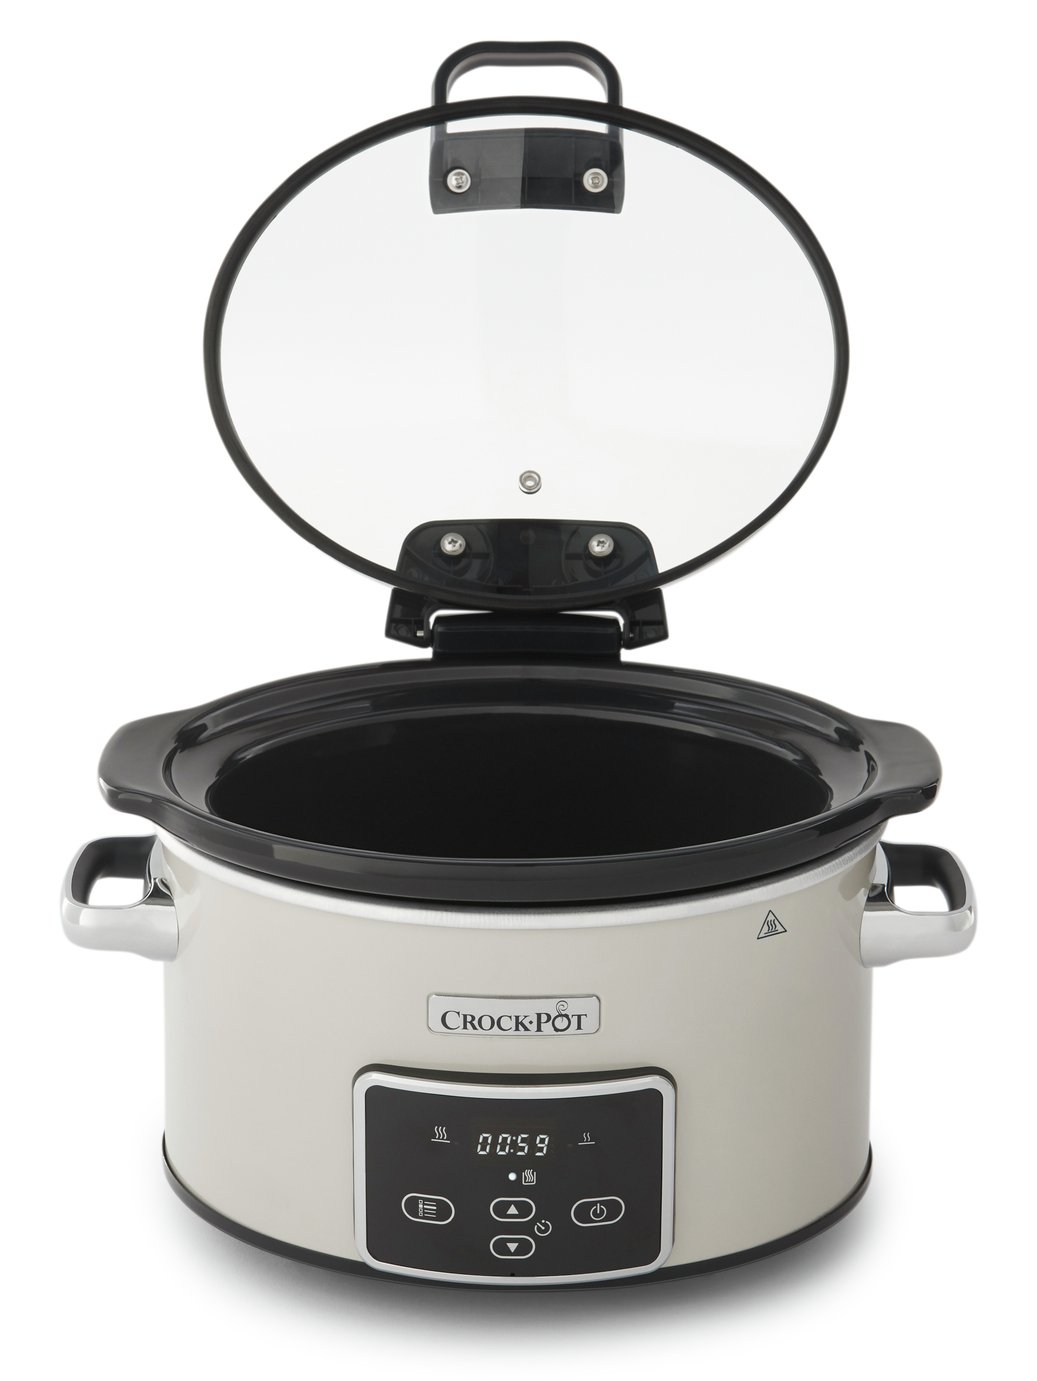 Crockpot 3.5L Digital Slow Cooker with Hinged Lid - Cream